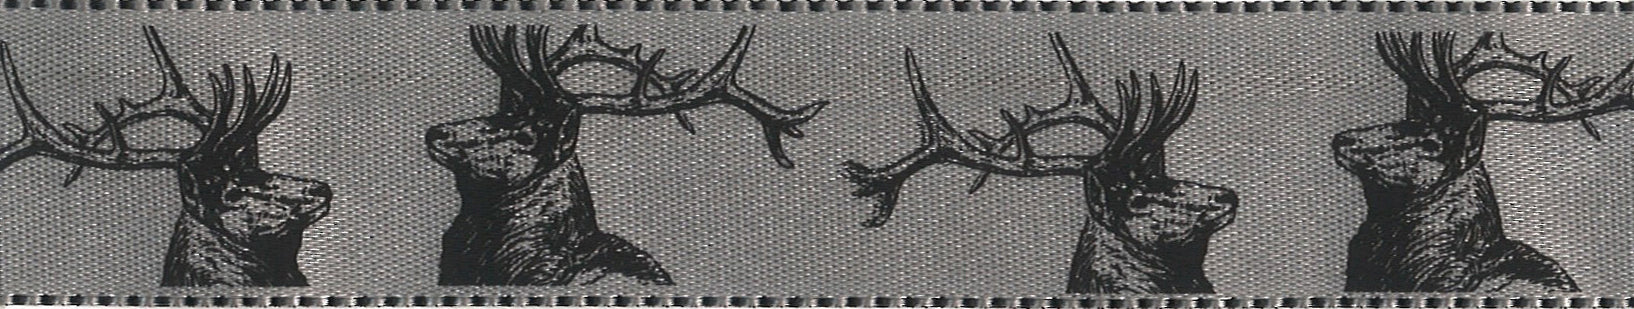 Berisfords Satin Ribbon with Stag Print - Silver Grey 25mm